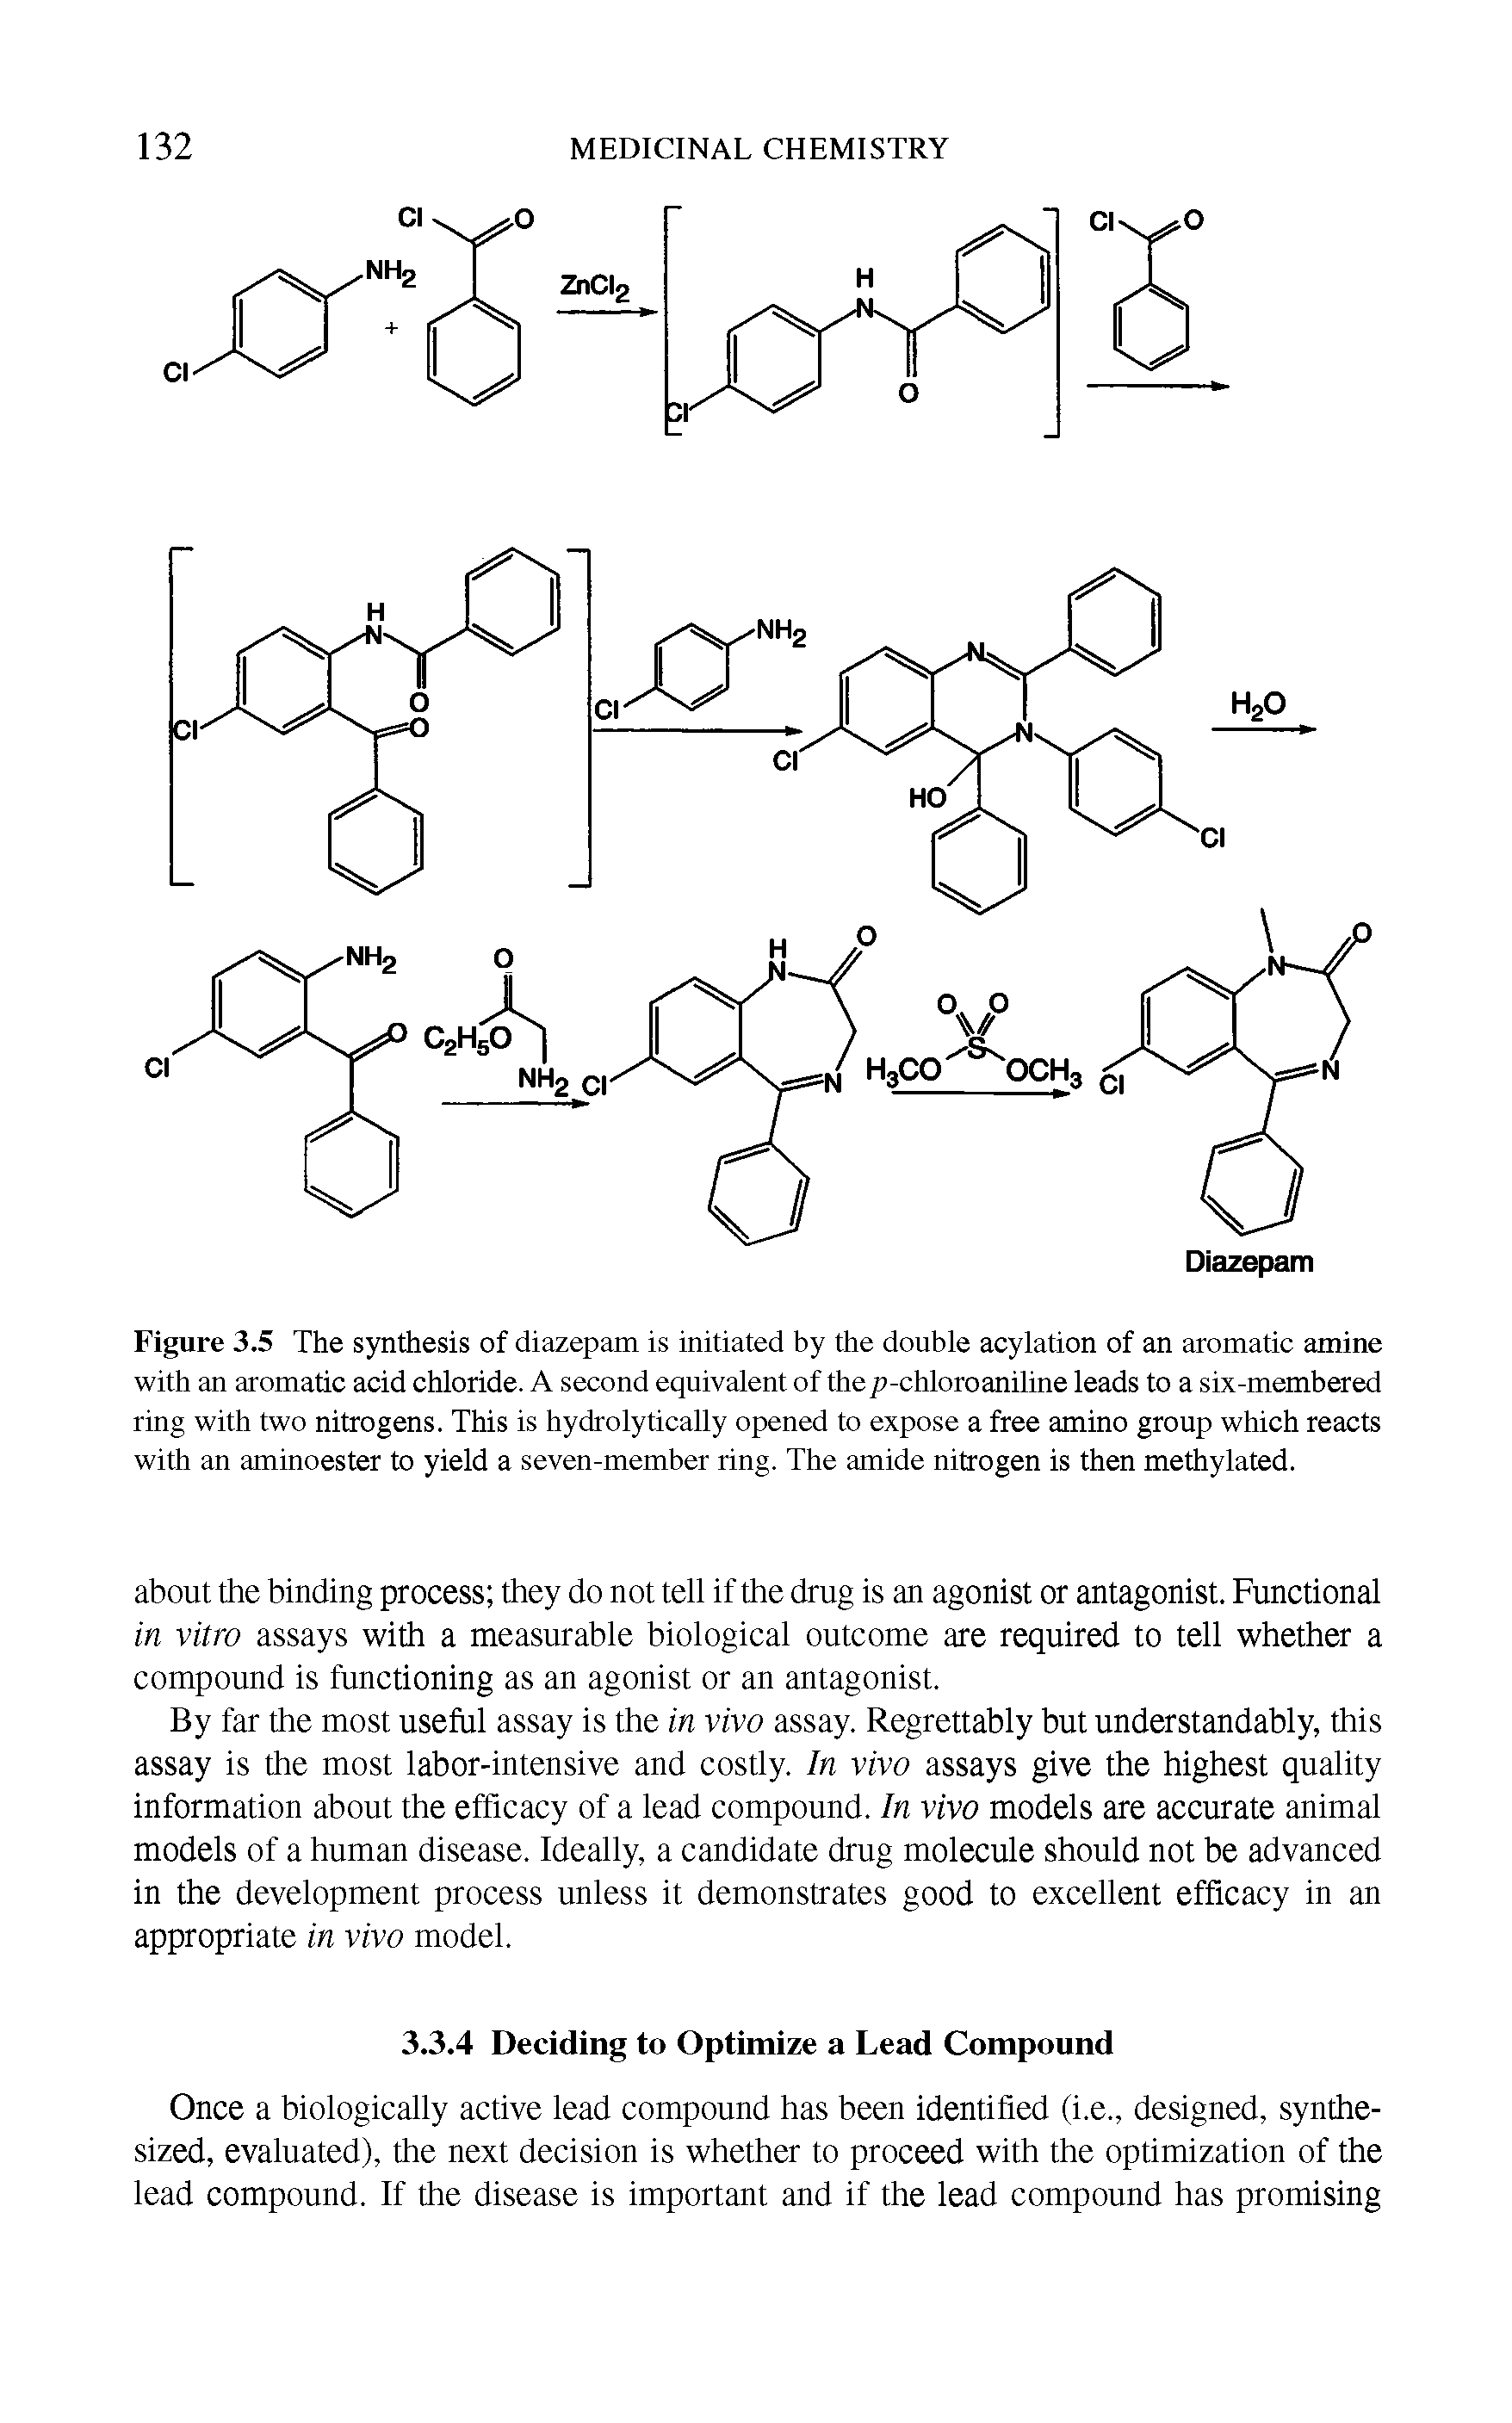 Figure 3.5 The synthesis of diazepam is initiated by the double acylation of an aromatic amine with an aromatic acid chloride. A second equivalent of the p-chloroaniline leads to a six-membered ring with two nitrogens. This is hydrolytically opened to expose a free amino group which reacts with an aminoester to yield a seven-member ring. The amide nitrogen is then methylated.